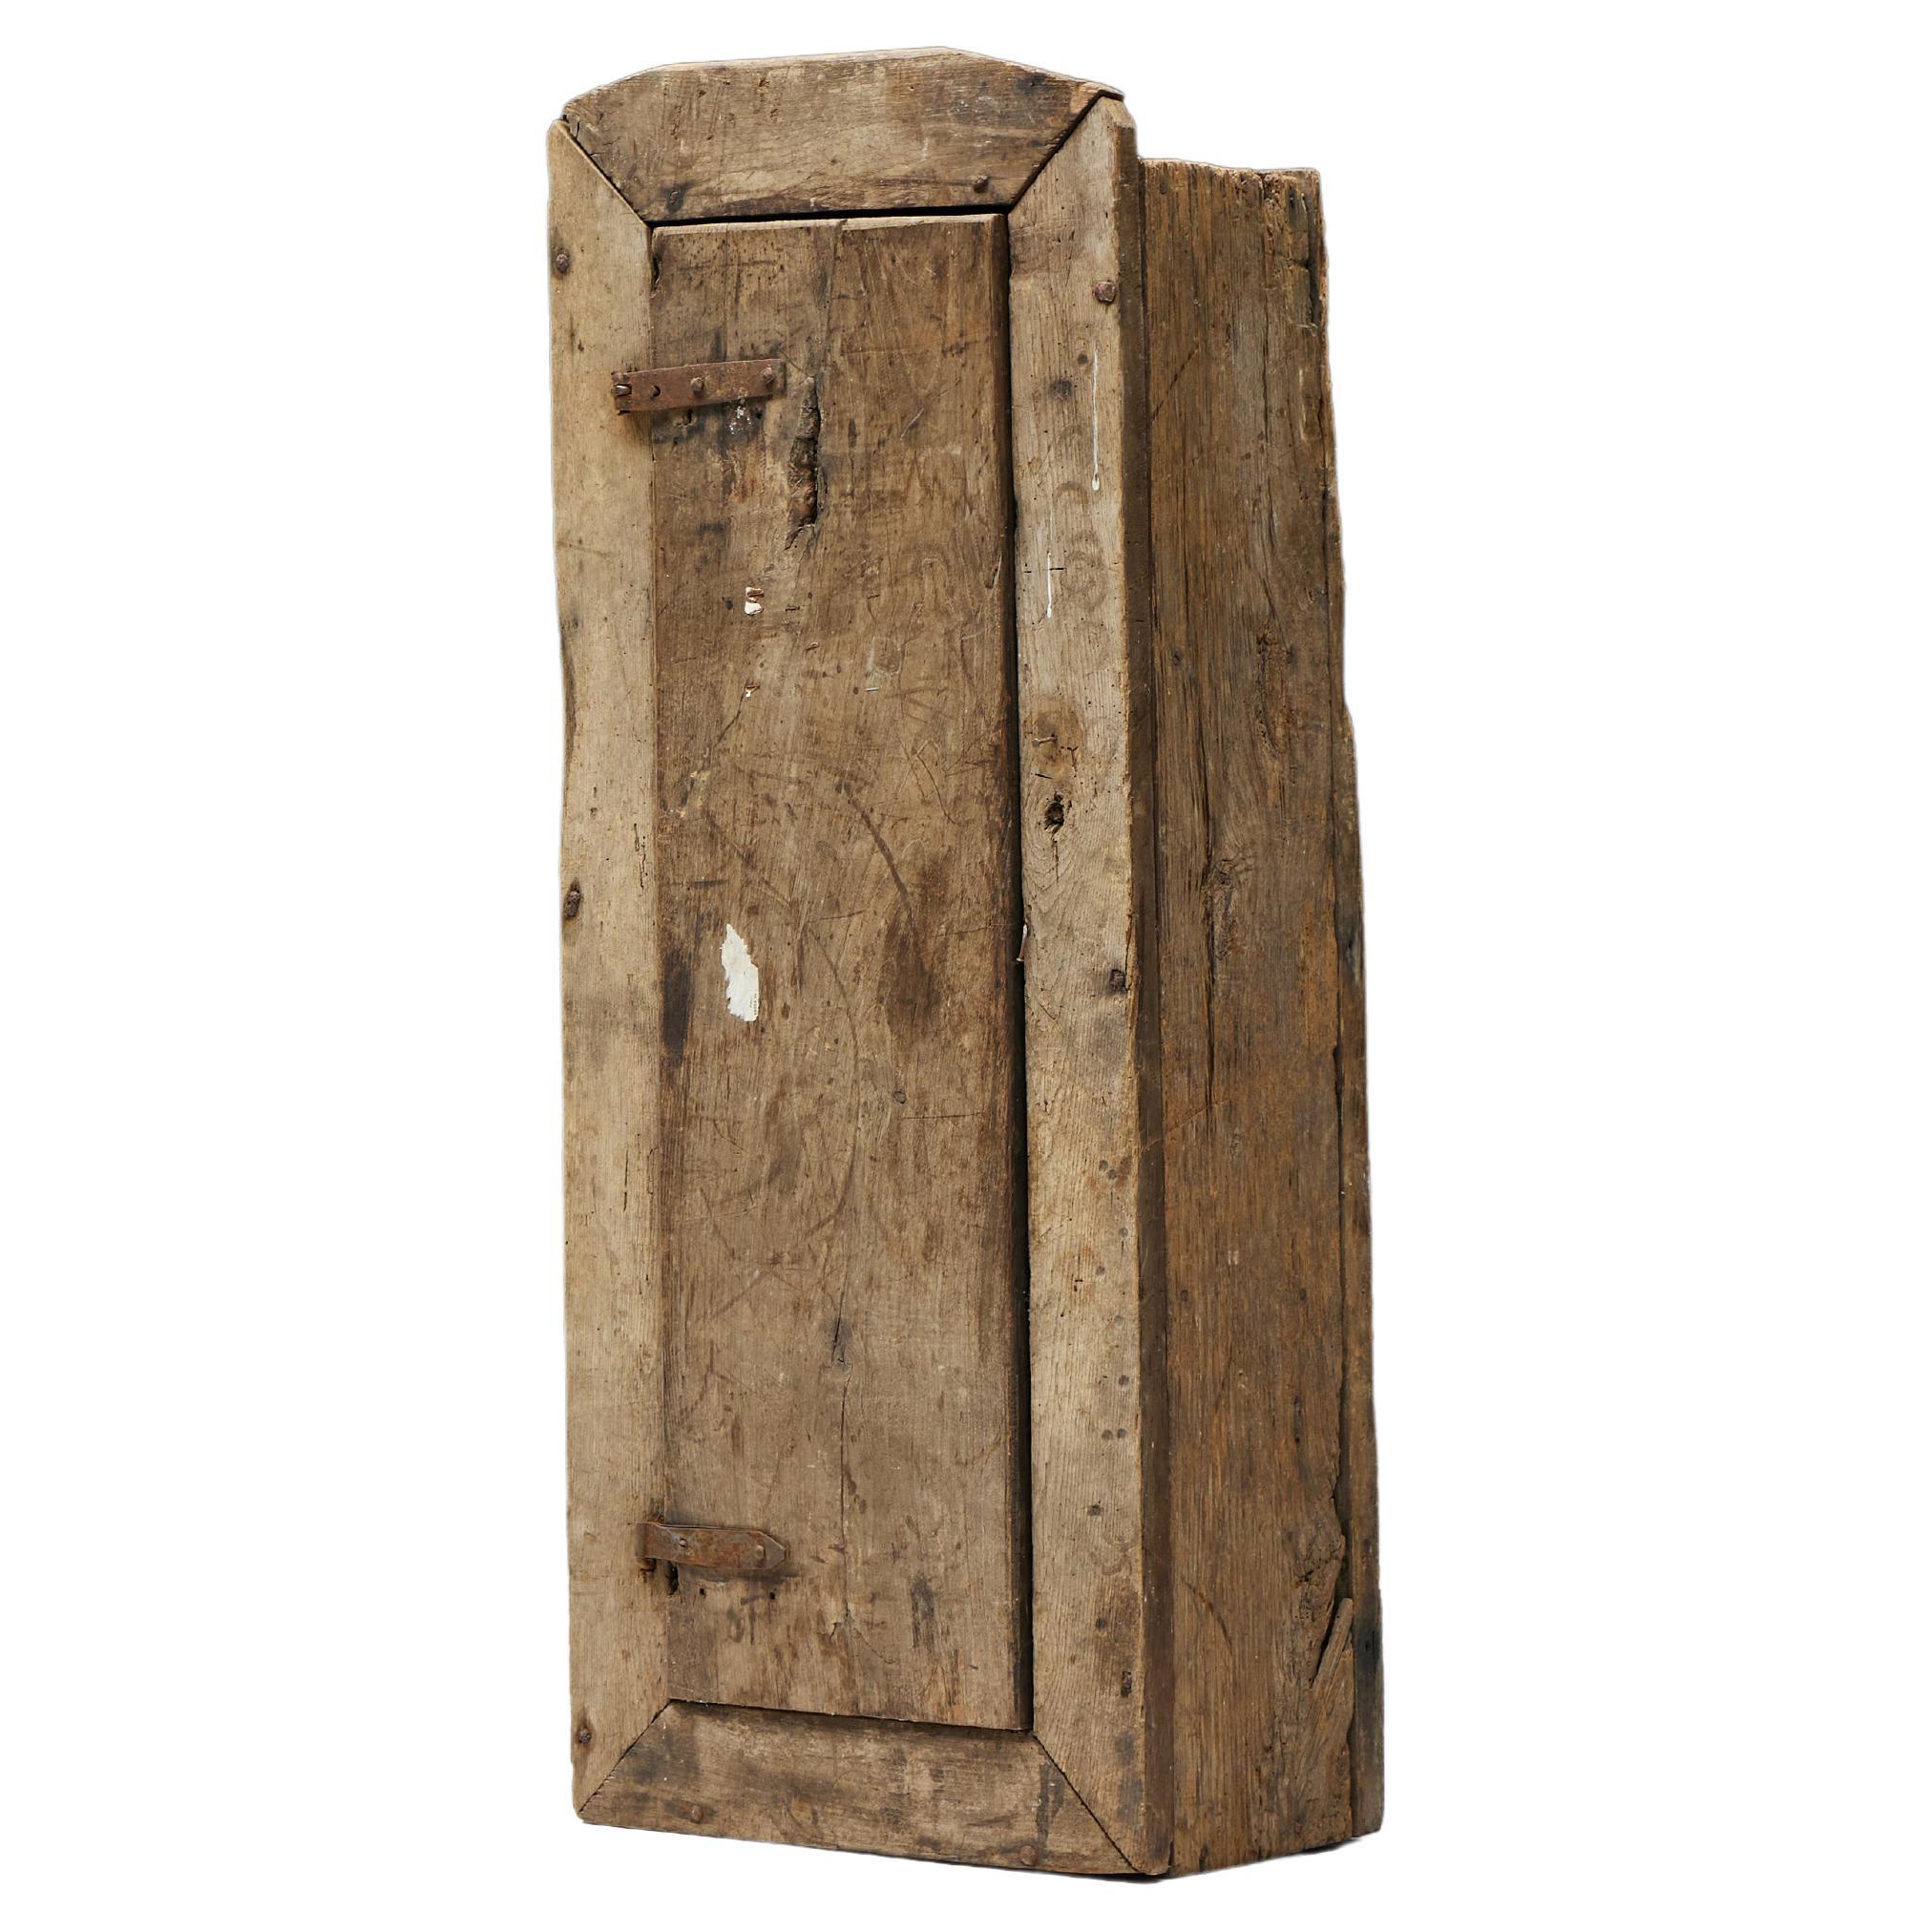 Rustic Travail Populaire Cupboard, France, 18th Century